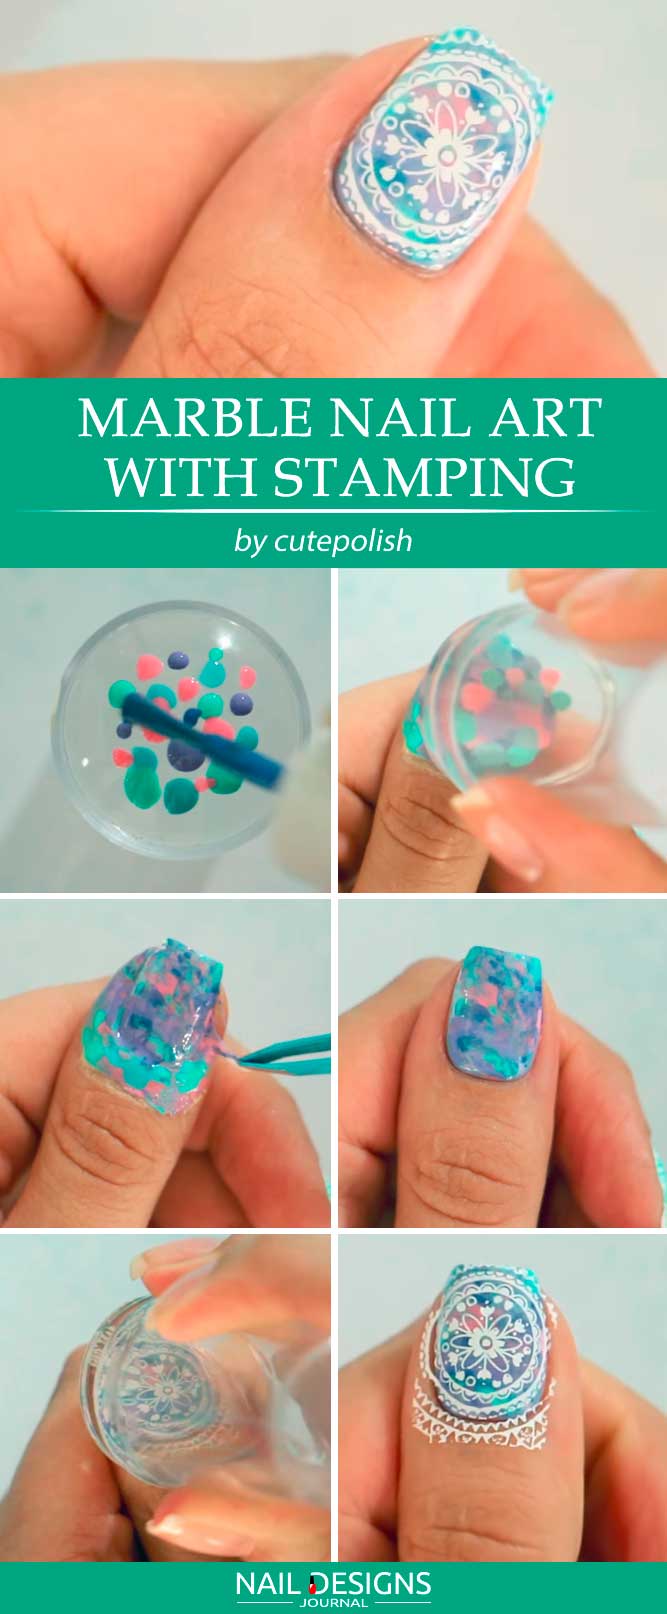 Marble Nail Art With Stamping